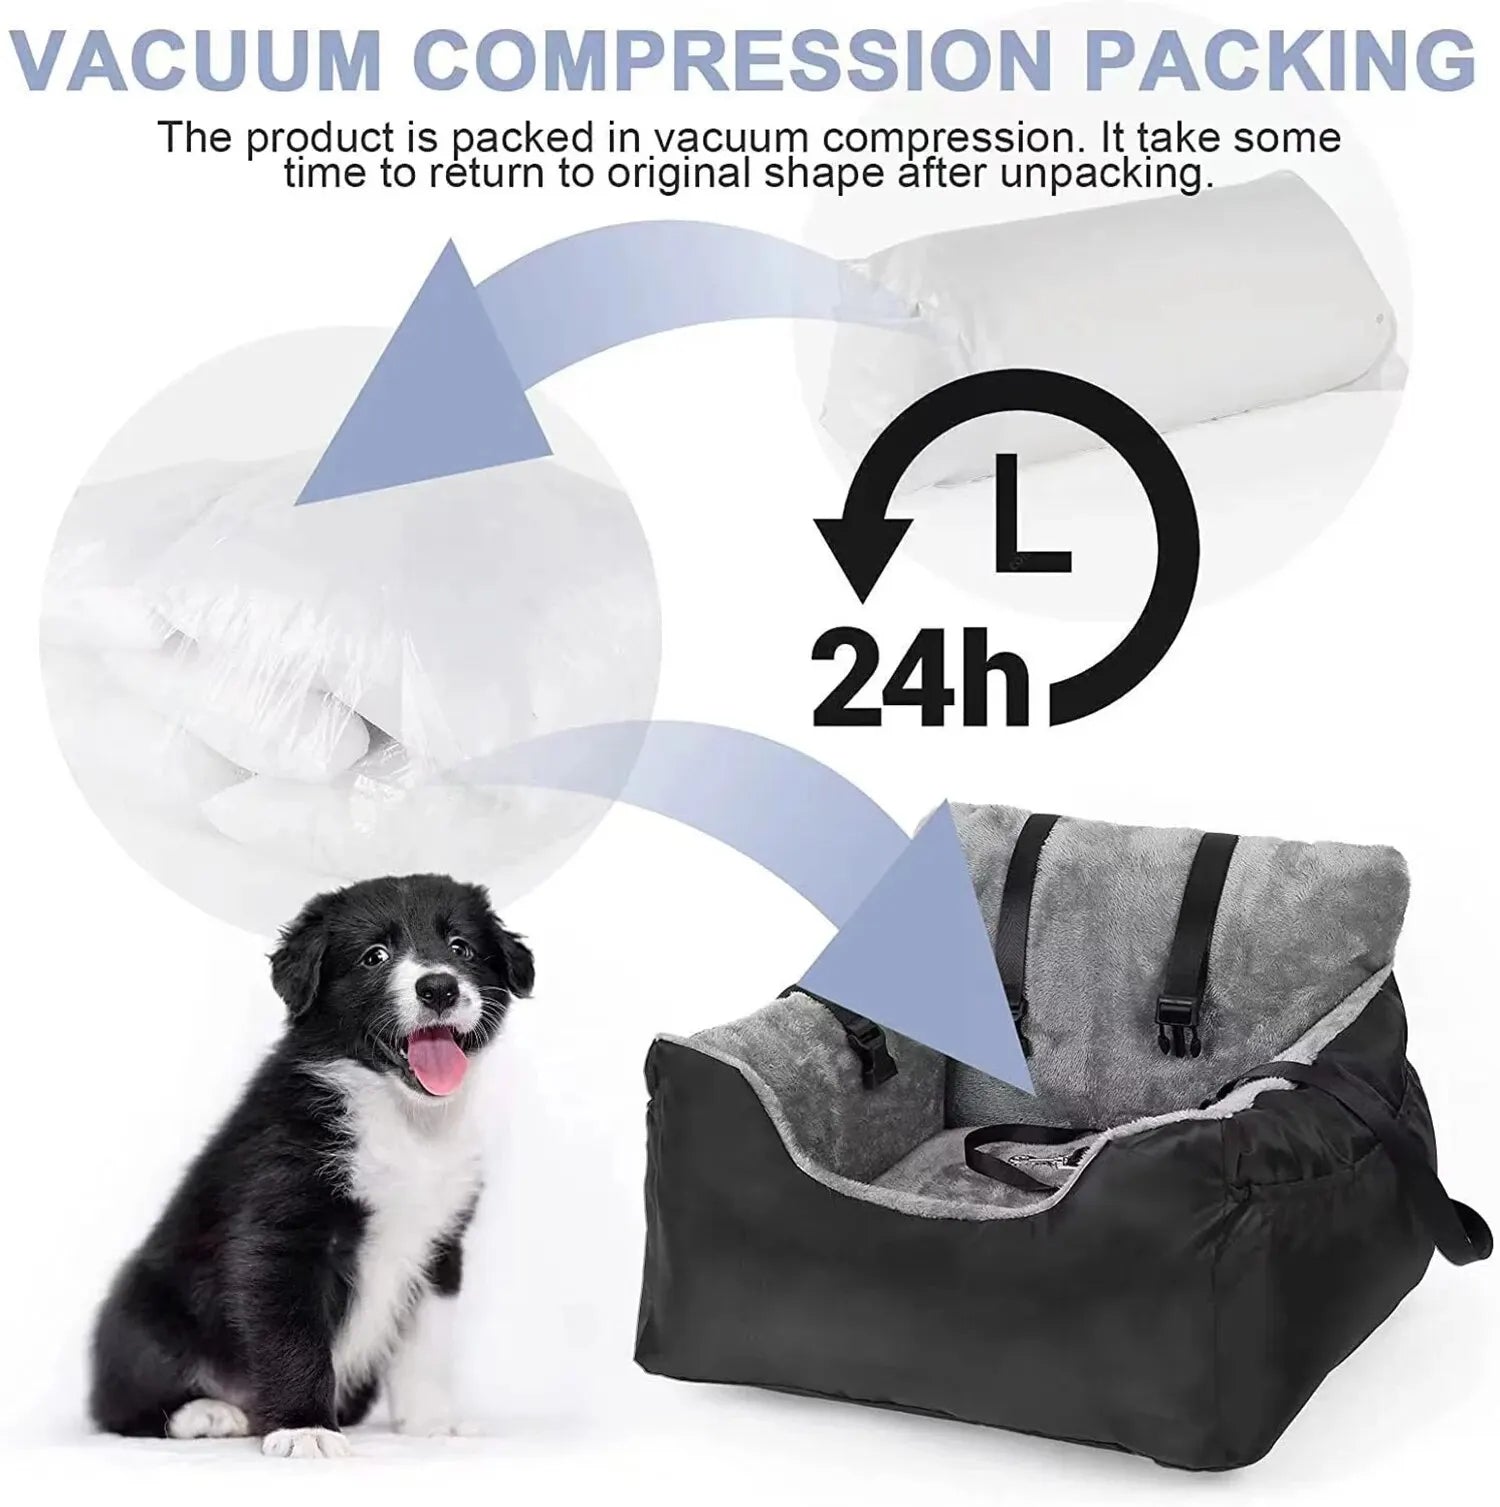 Dog Car Seat with Seat Belt Washable Dog Booster Seat for Small Dogs, Anti-Slip Travel Pet Car Bed for Front or Back Seat, Adjustable Safety Buckle, with Convenient Storage Pockets